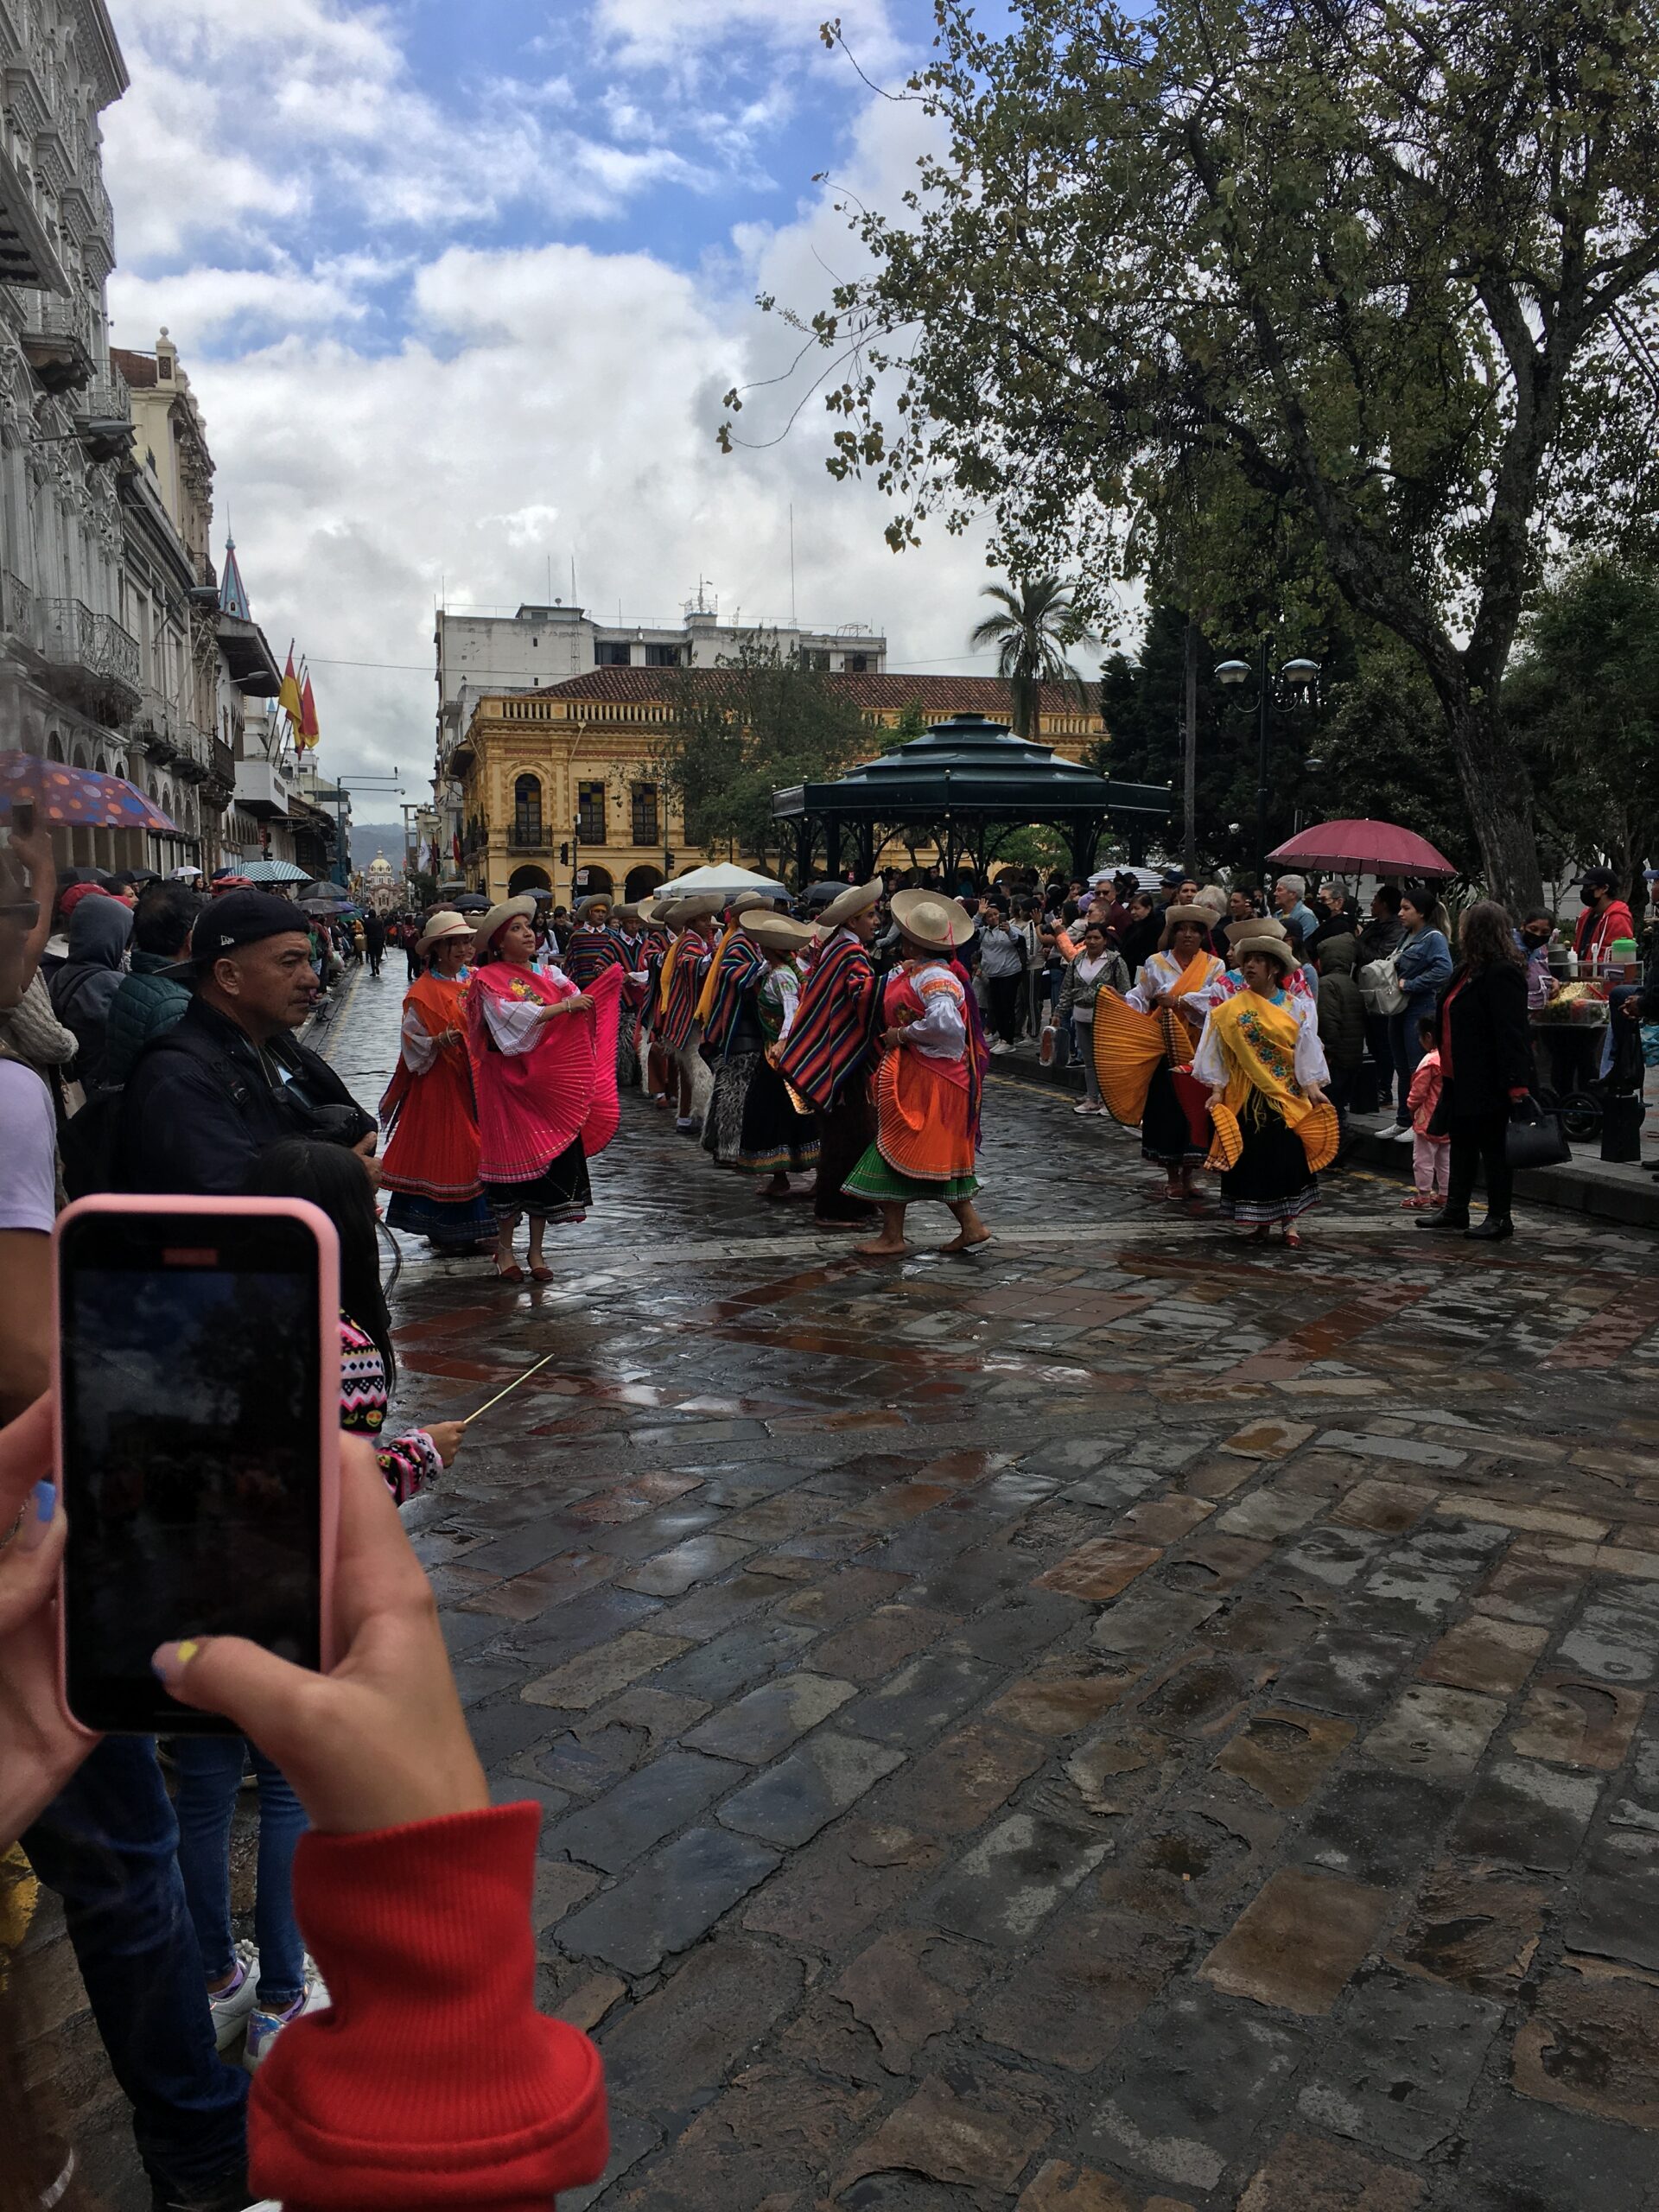 Pictured here is a parade in Cuenca. The dancers pictured are wearing traditional clothing and dancing traditionally down the streets of Cuenca. 